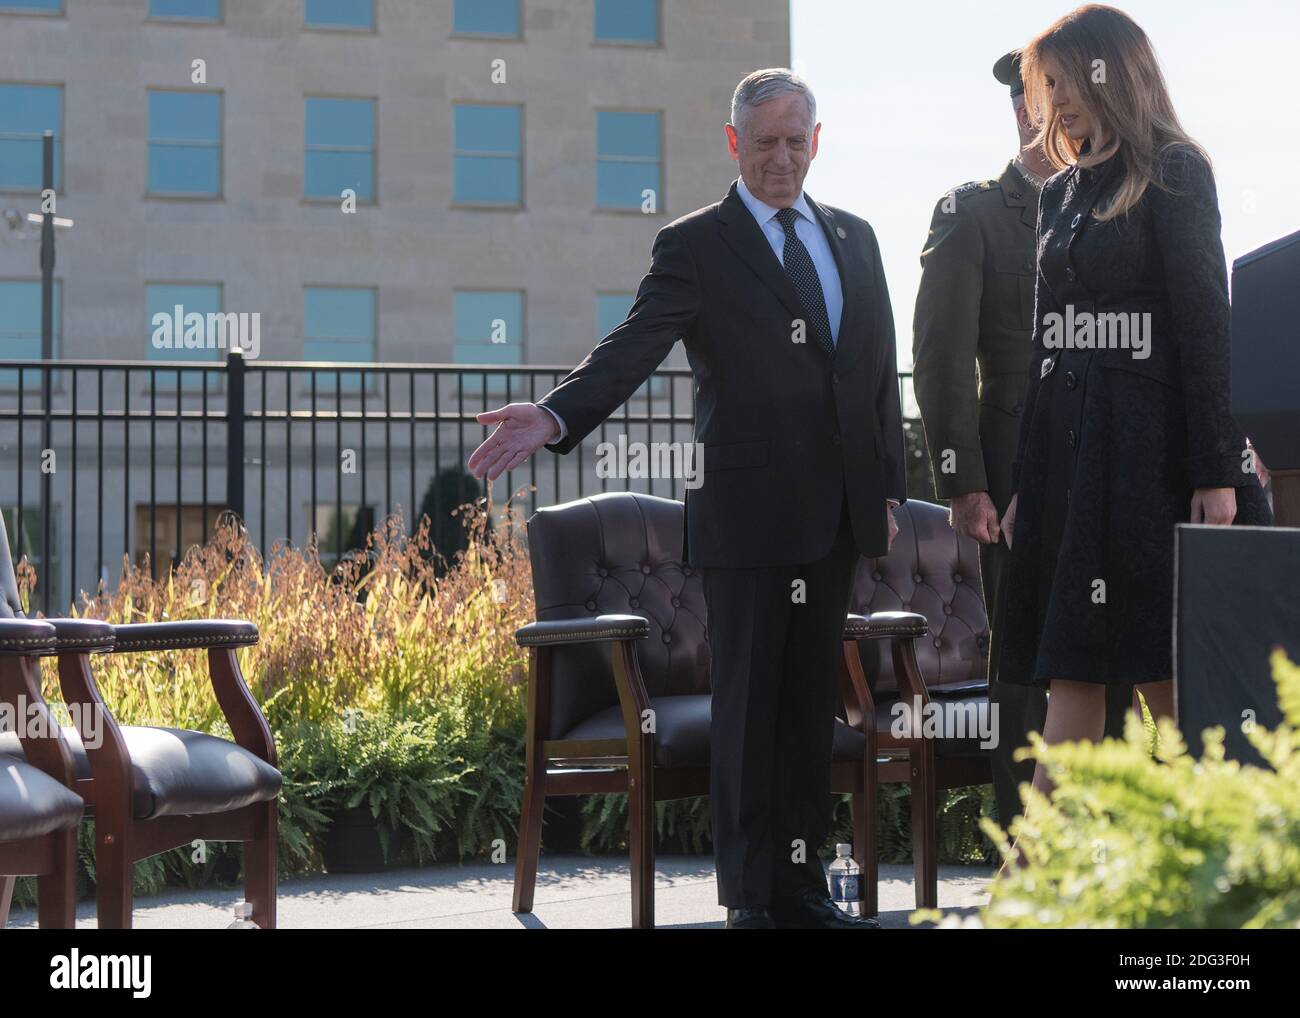 U.S. Defense Secretary James Mattis, left, shows First Lady Melania Trump her seat for the 9/11 Observance Ceremony at the Pentagon September 11, 2017 in Washington, DC. Stock Photo